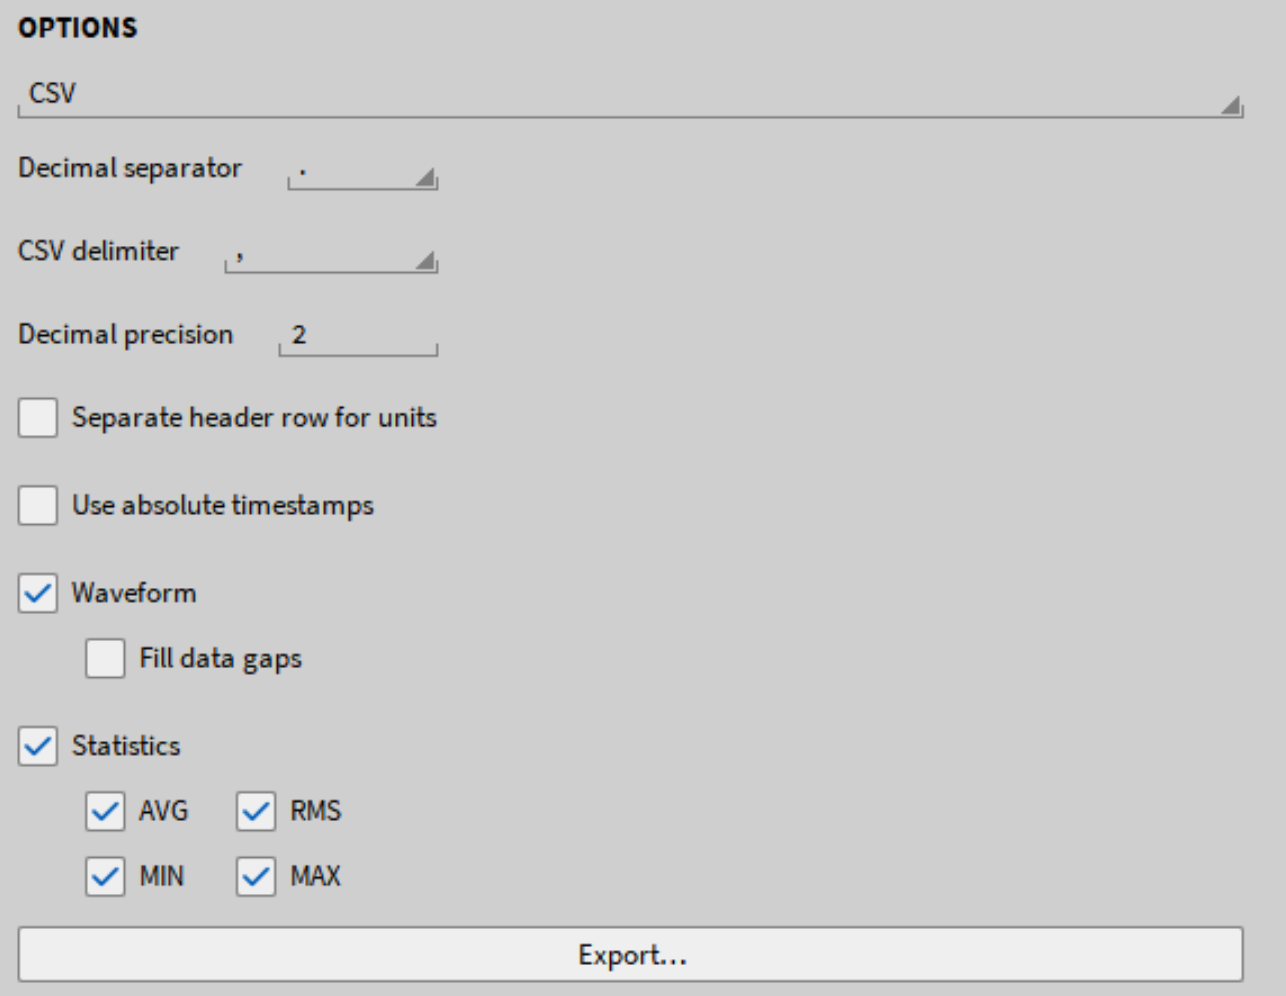 Export Options for a \*.csv-file